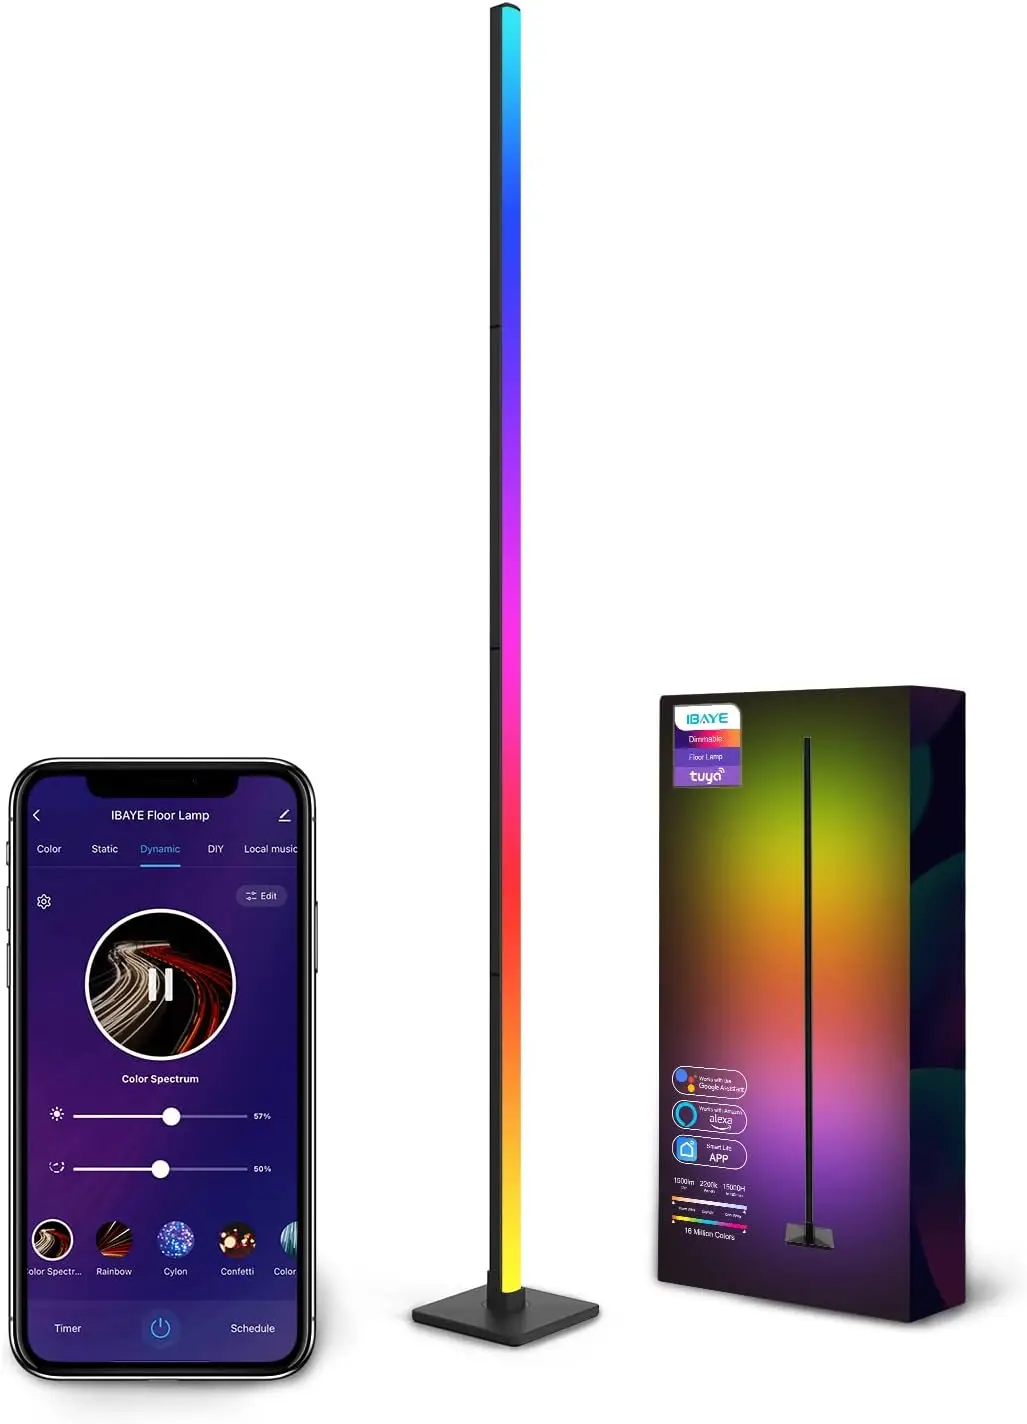 

Floor Lamp,LED Smart Floor Lamp,16 Million Colors, DIY & Scene Mode,Music Sync,compatible with Google Assistant and Alexa,Wi н